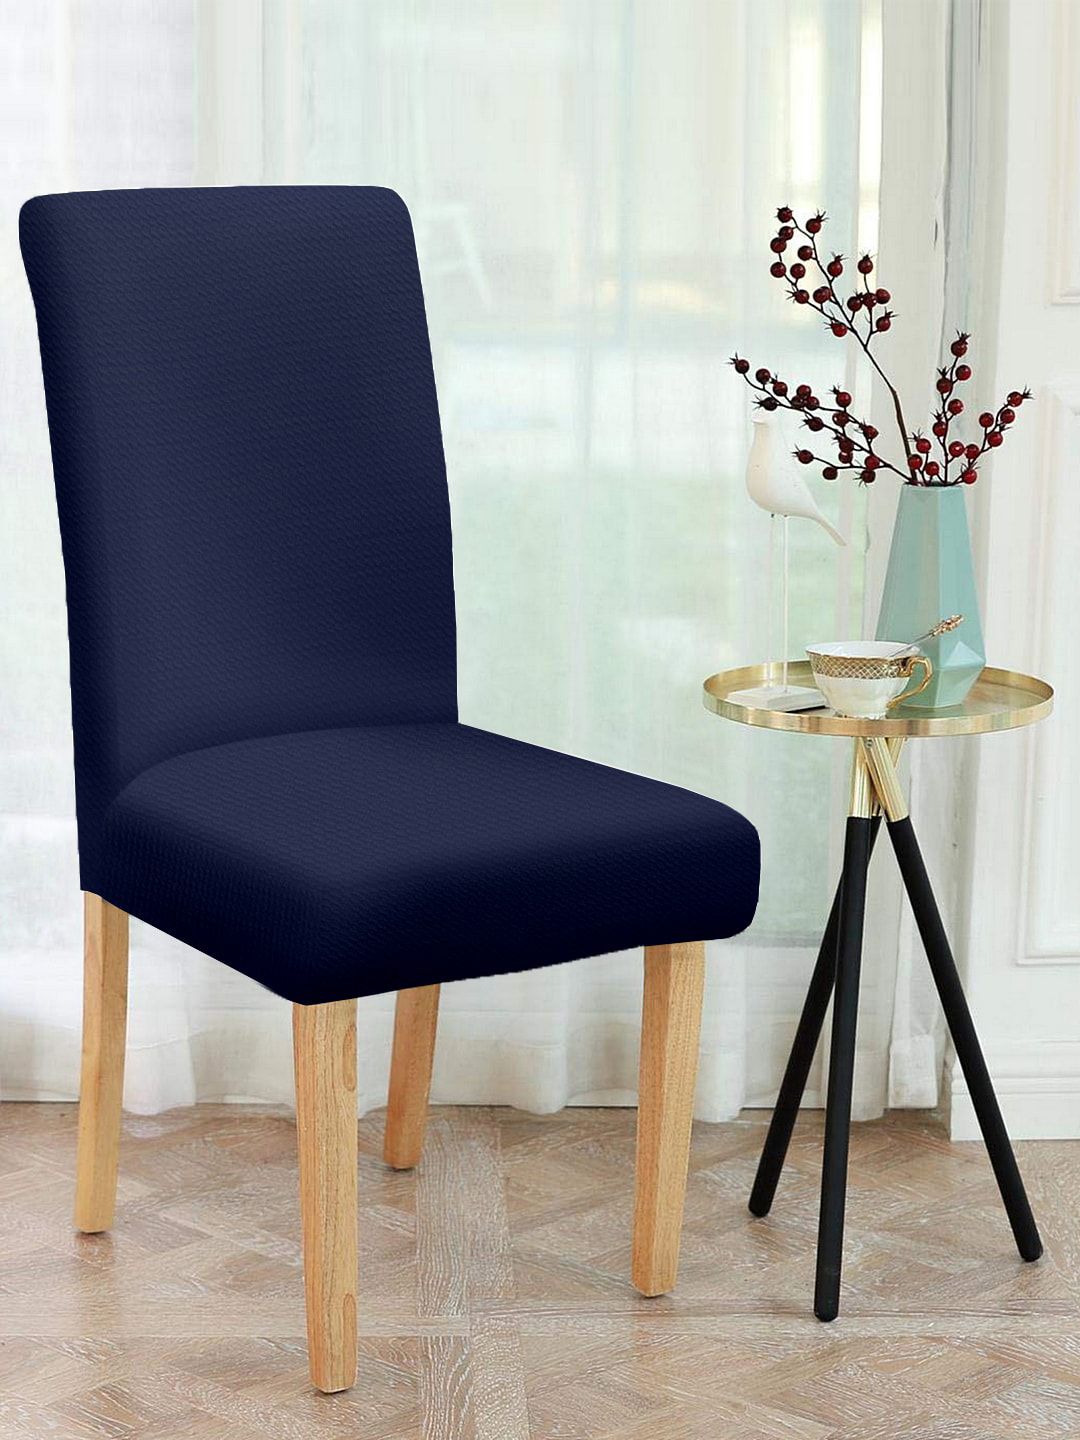 Cortina Set Of 4 Navy Blue Self Design Chair Covers Price in India